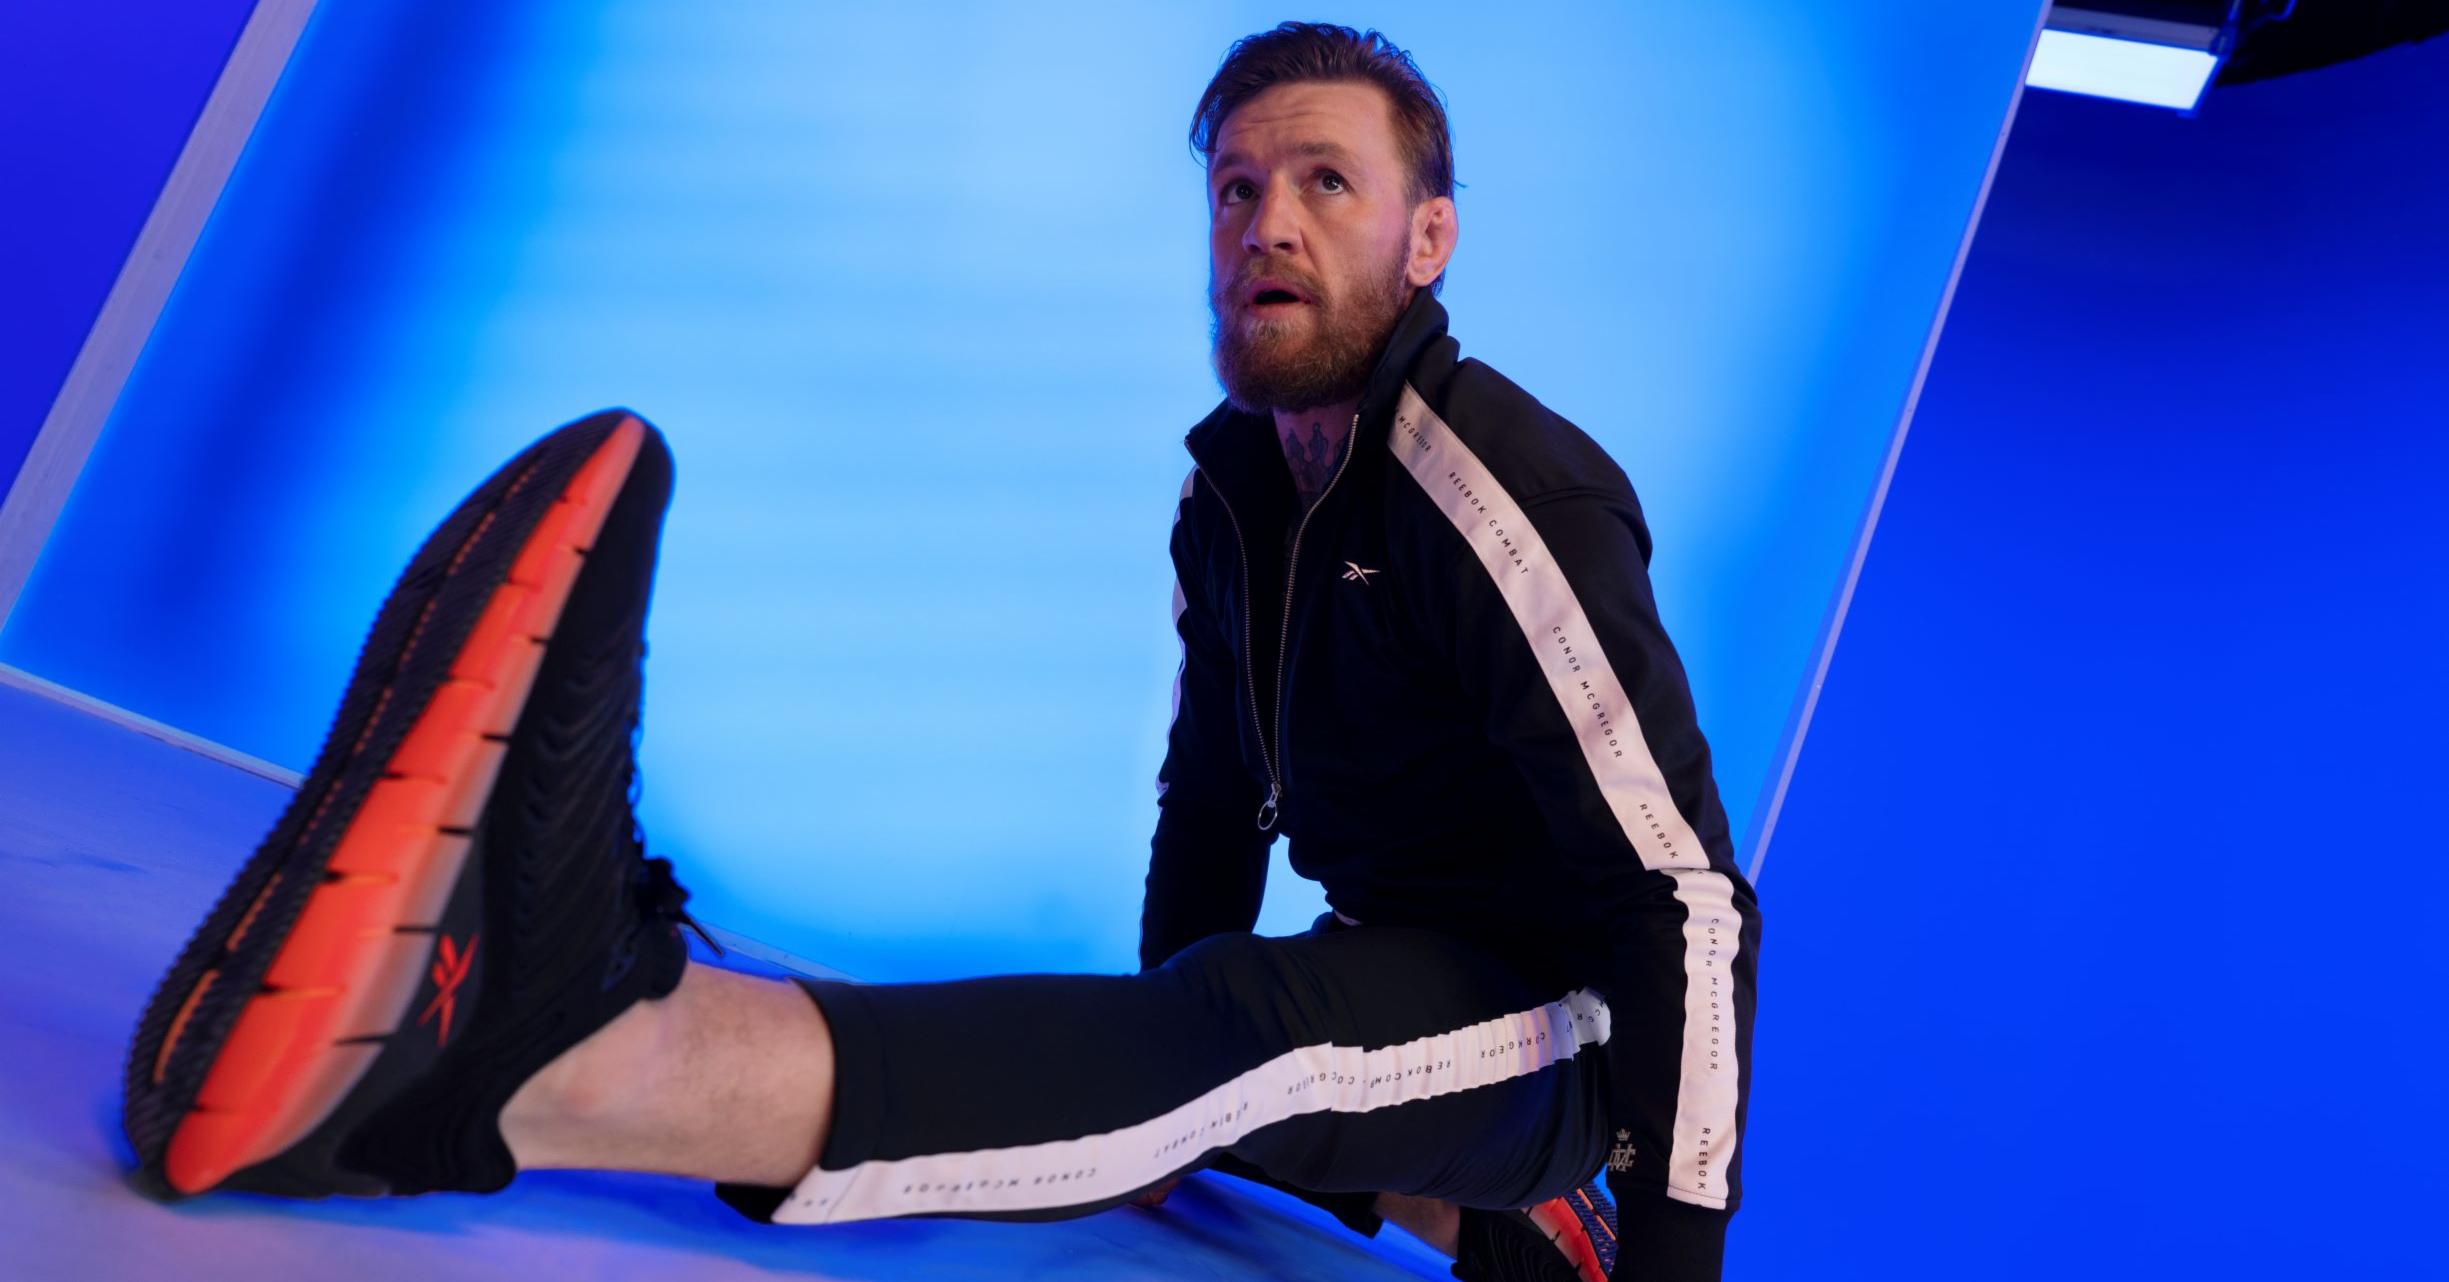 Polishing Previous somewhere Reebok and Conor McGregor Launch New 'Zig Kinetica' Sneaker - Maxim